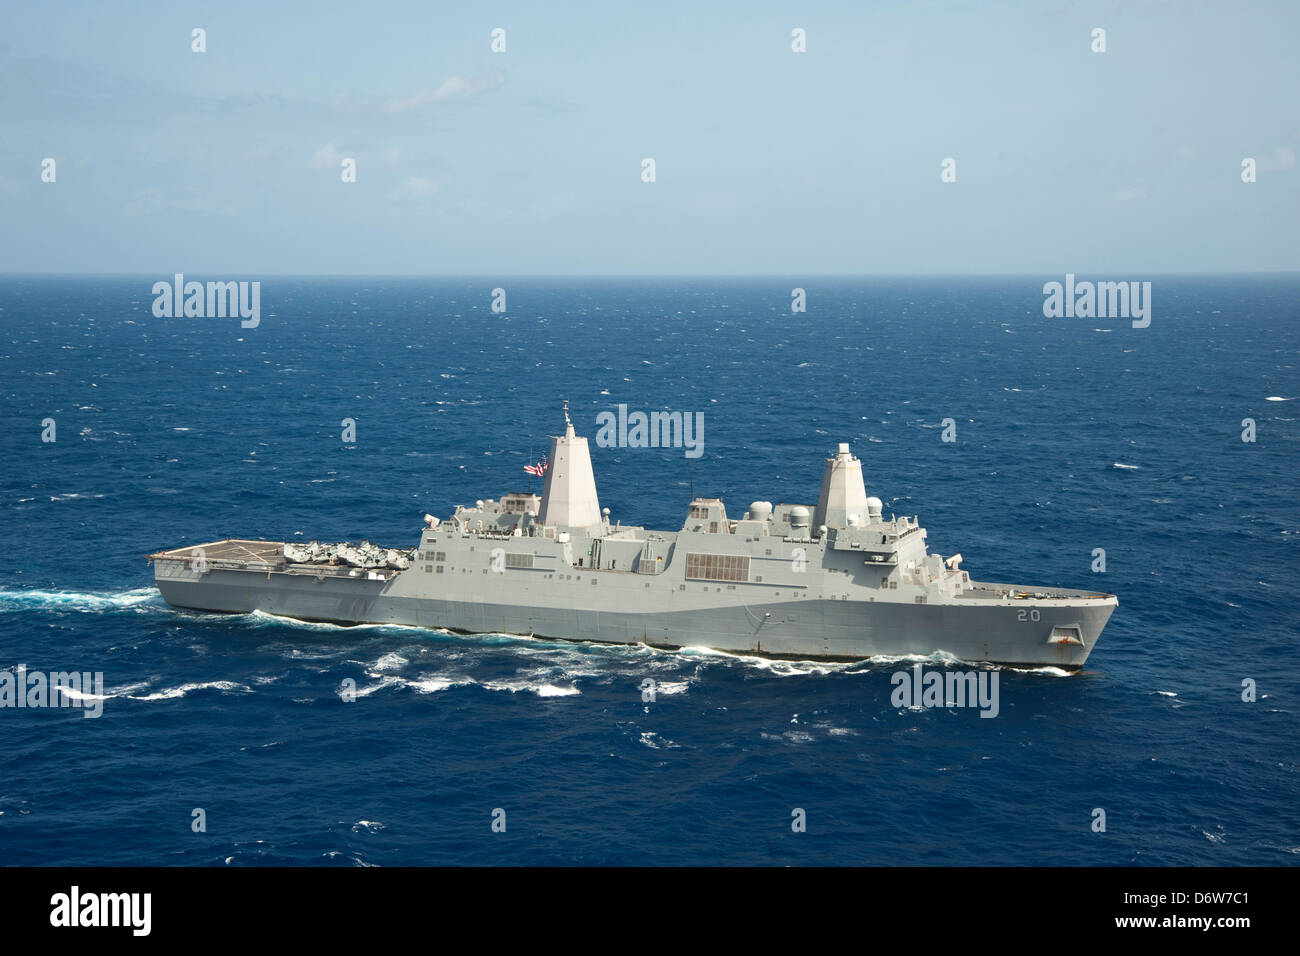 US Navy Amphibious dock ship USS Green Bay during operations April 23, 2013 in the Pacific Ocean. Stock Photo